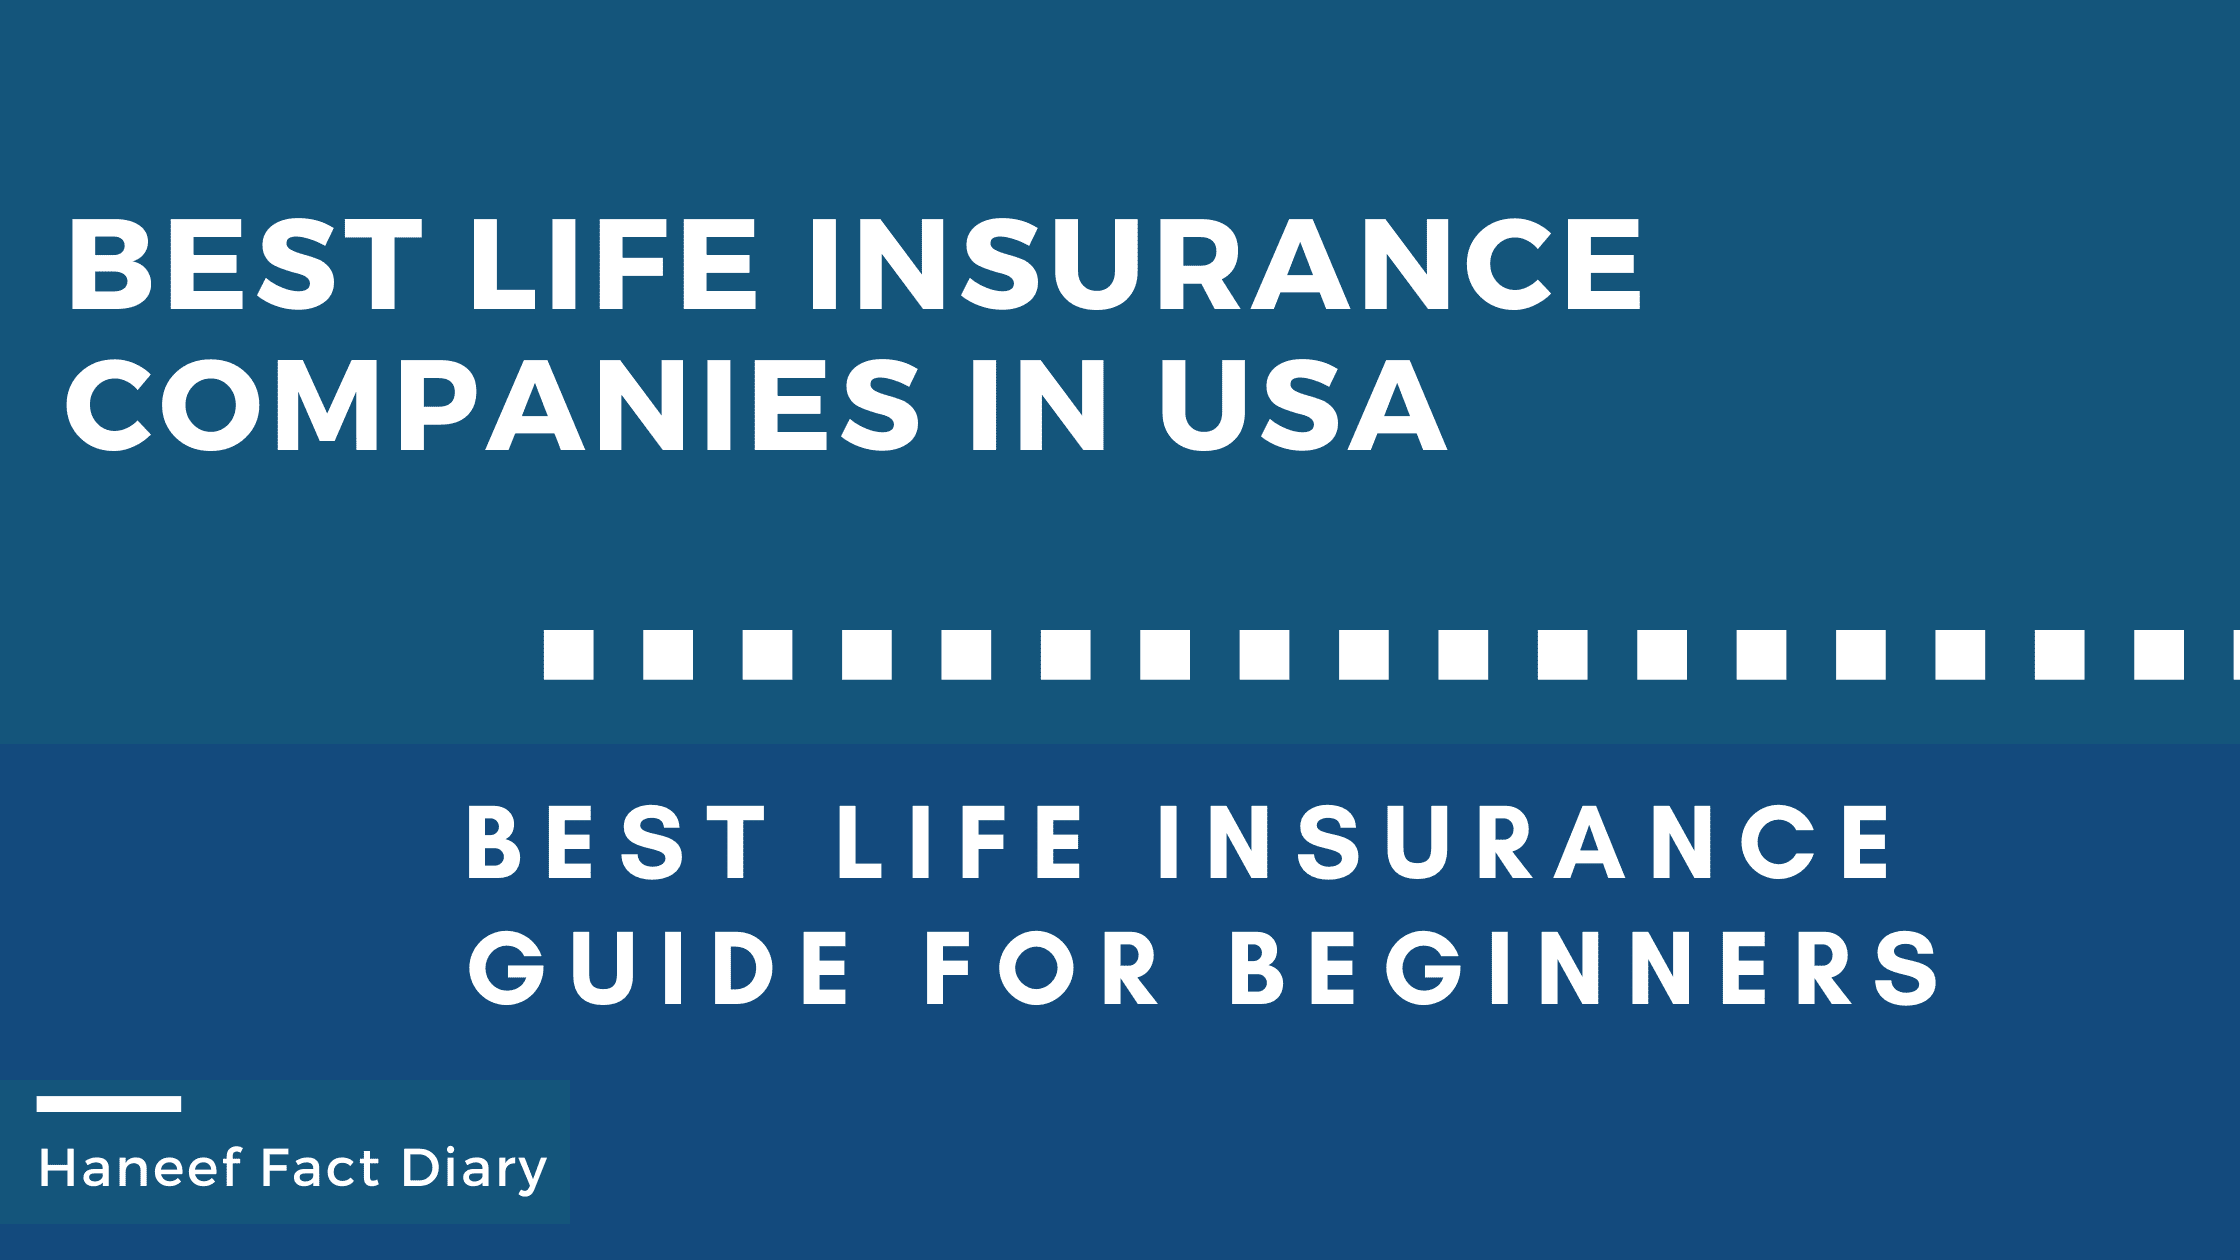 Best life insurance companies in USA